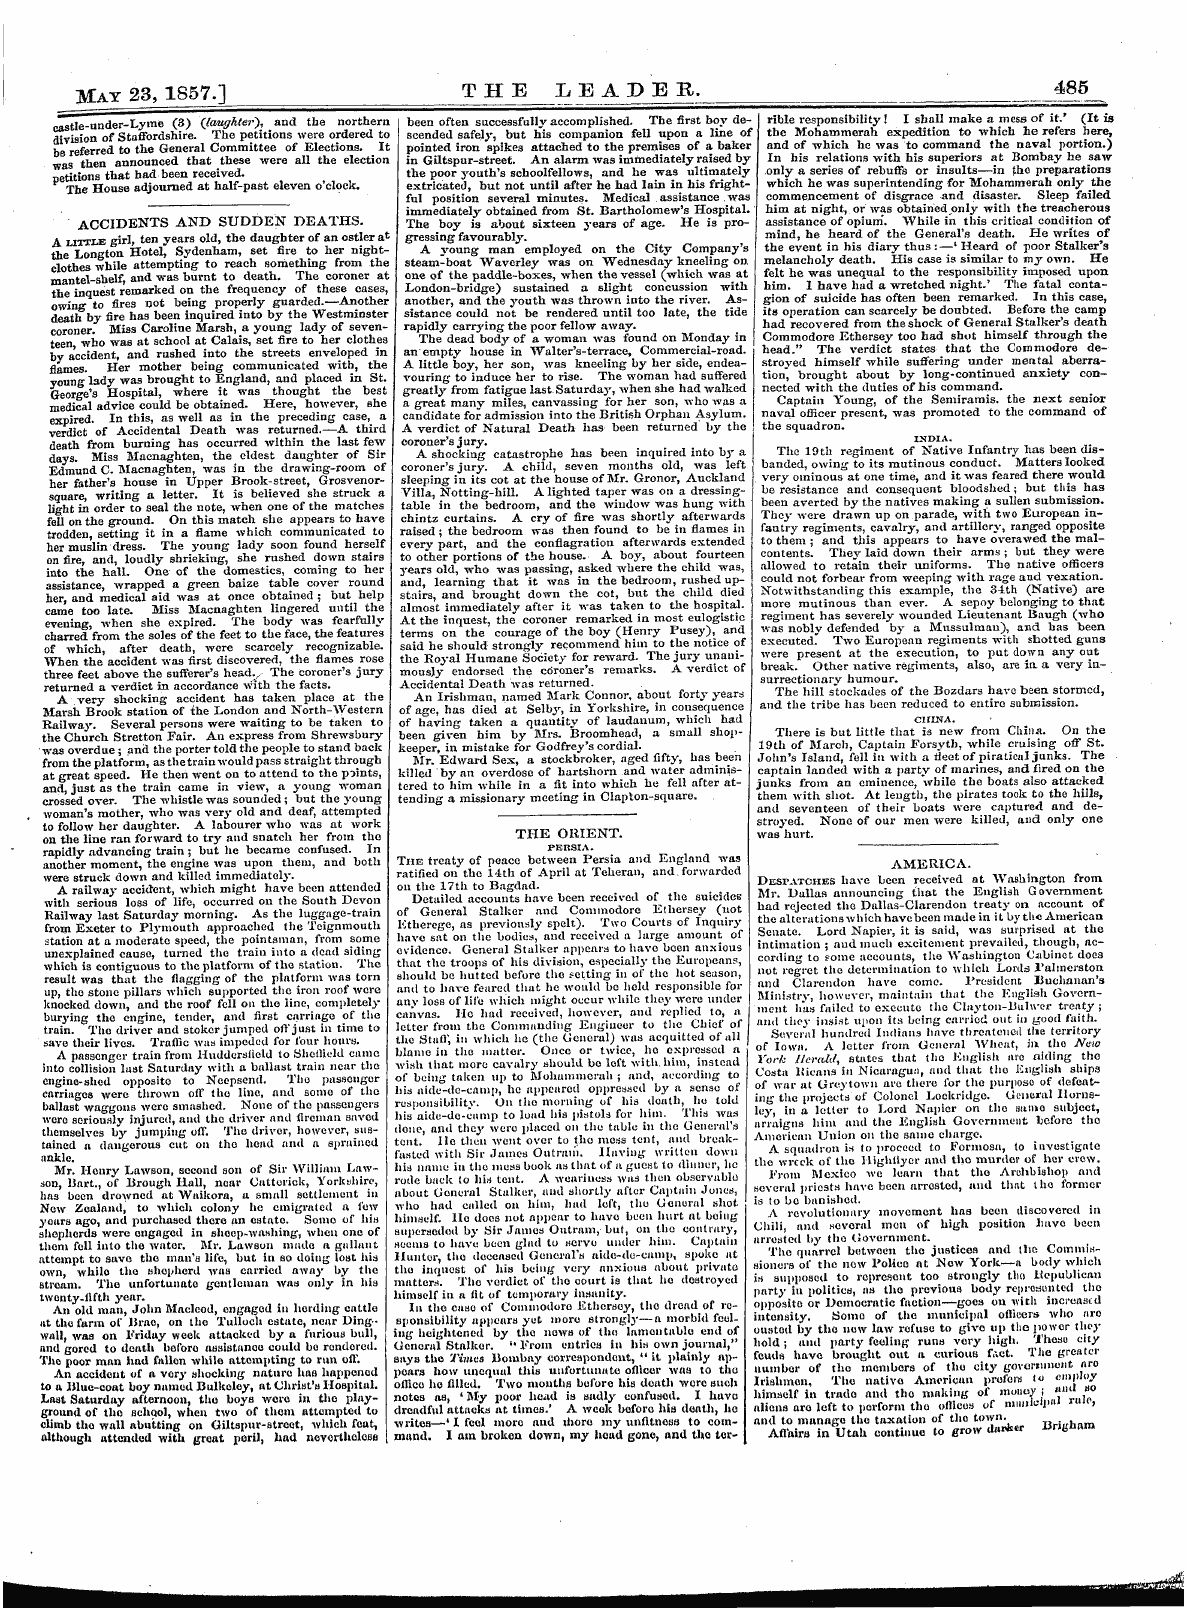 Leader (1850-1860): jS F Y, 1st edition: 5